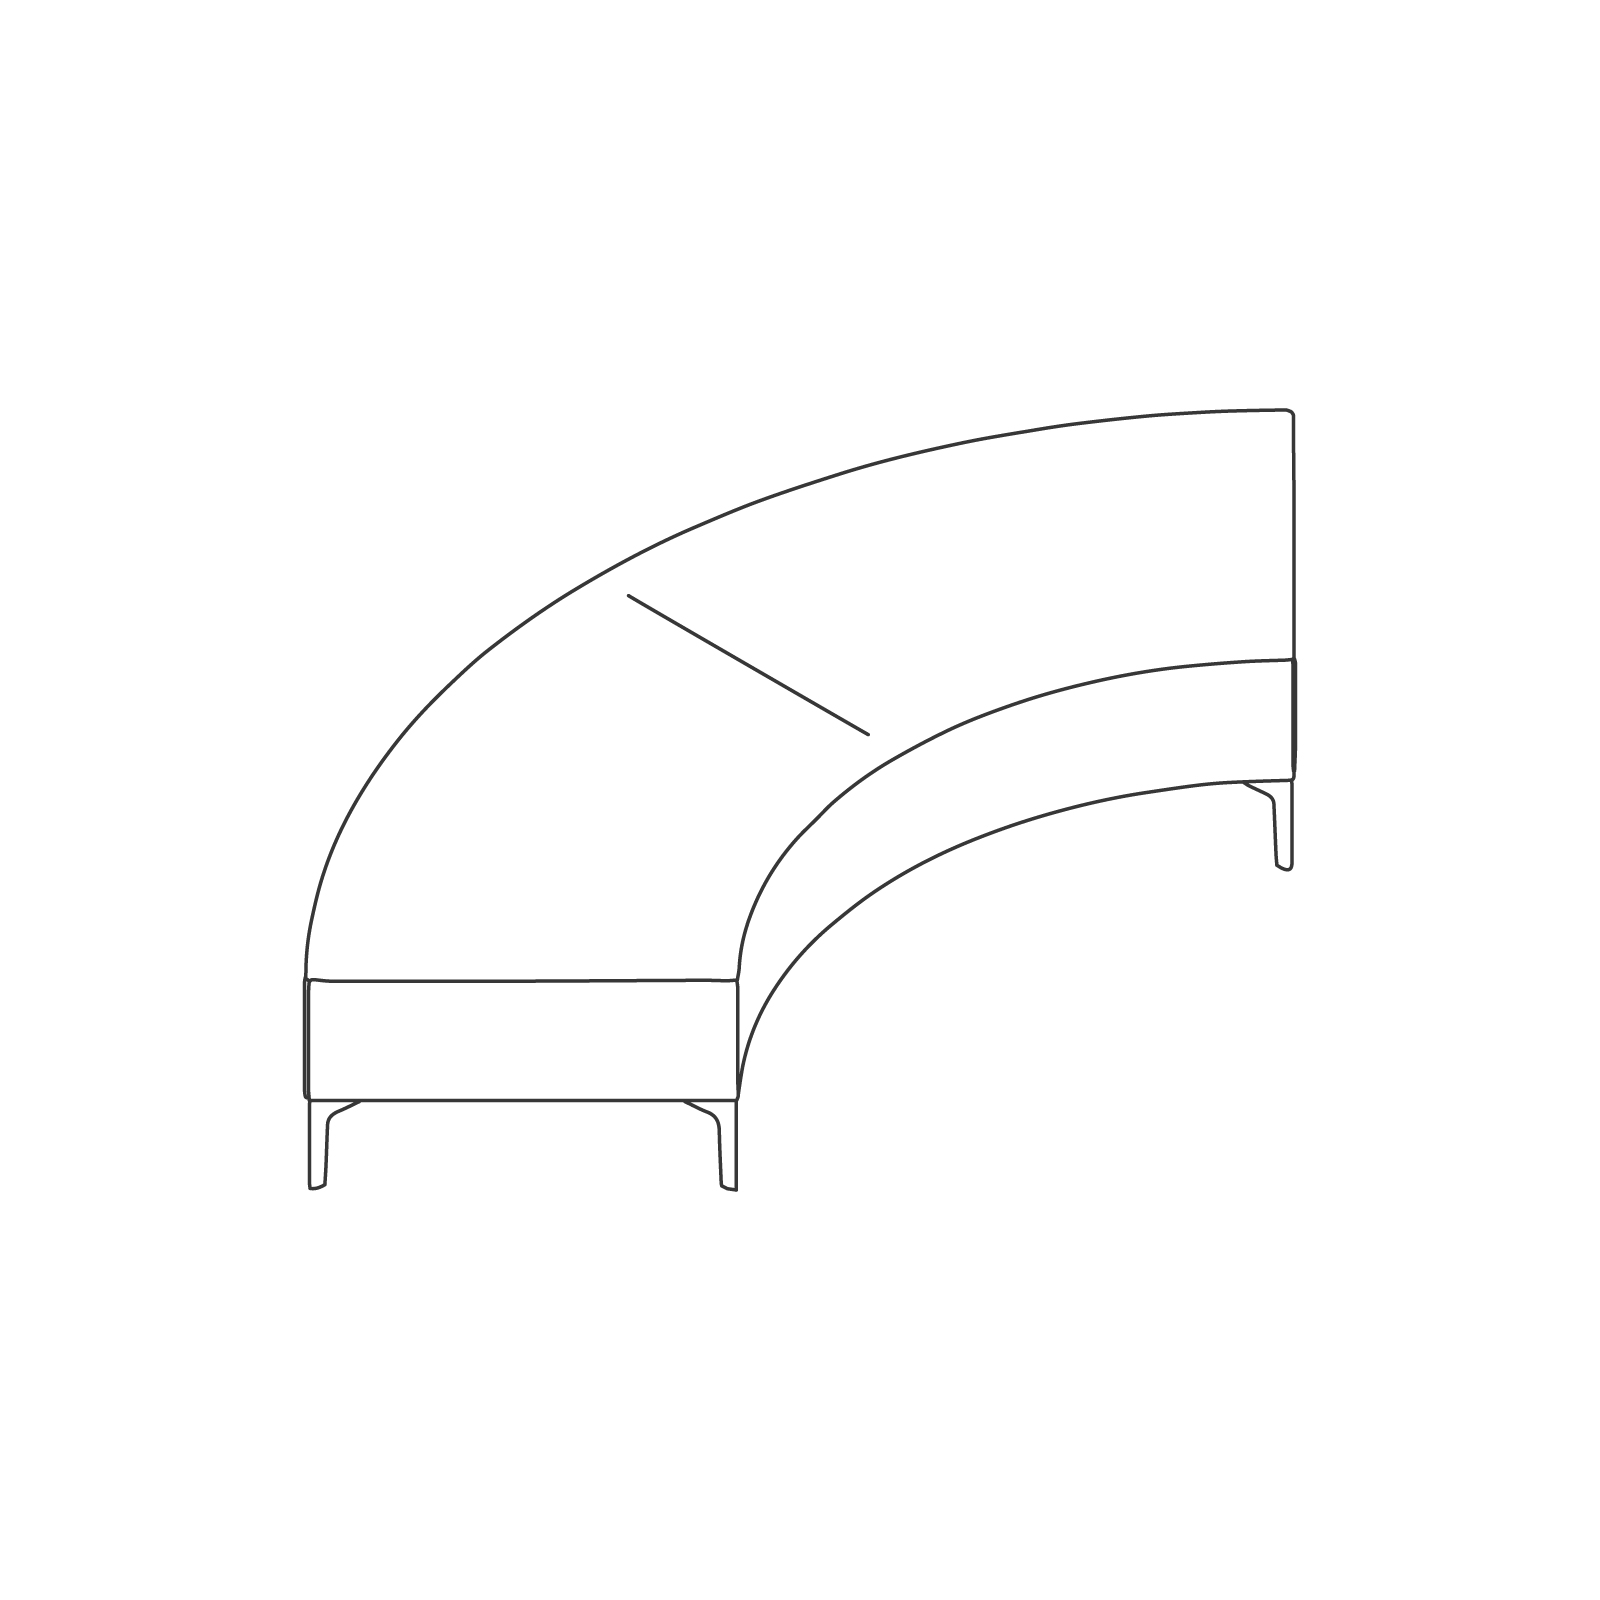 A line drawing - Symbol Bench–90-Degree Curve